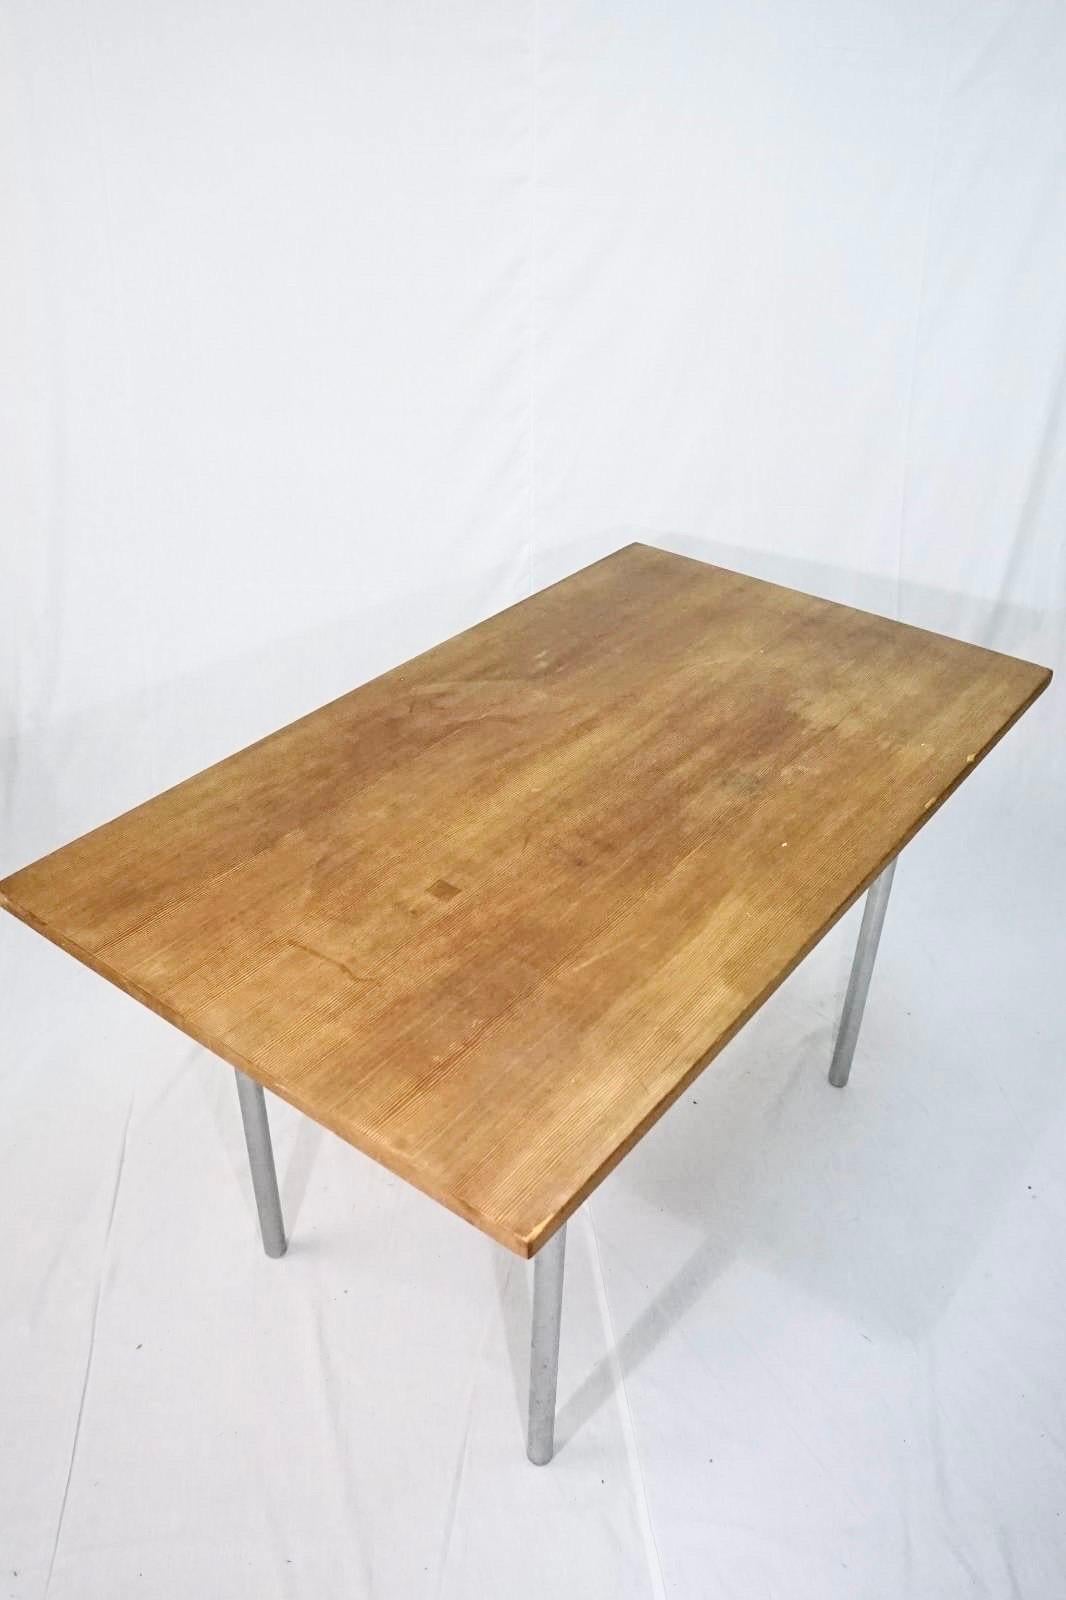 Poul Kjærholm Pk41 Dining Table in Oregon Pine Manufactured by E Kold In Fair Condition In Valby, 84